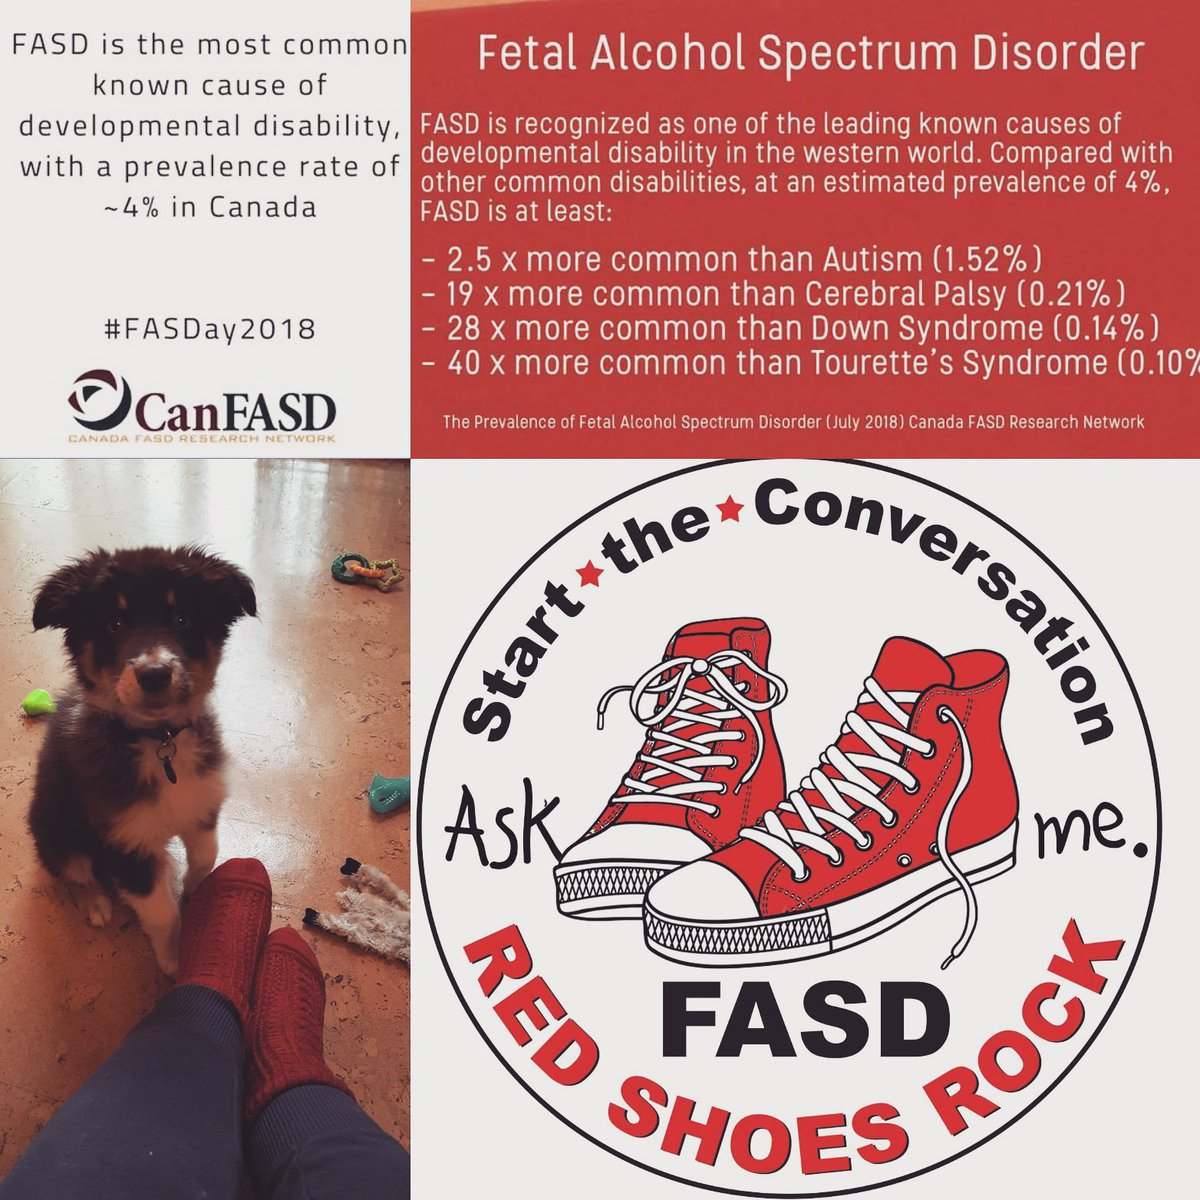 September 9th is FASD day the 9th day of the 9th month to highlight 9 sober months of pregnancy. Here are some facts about Fetal Alcohol Spectrum Disorder that you may not know. #FASDay2018 #redshoesrock I don't have red shoes but I do have these warm red socks @FASDwr @CanFASD